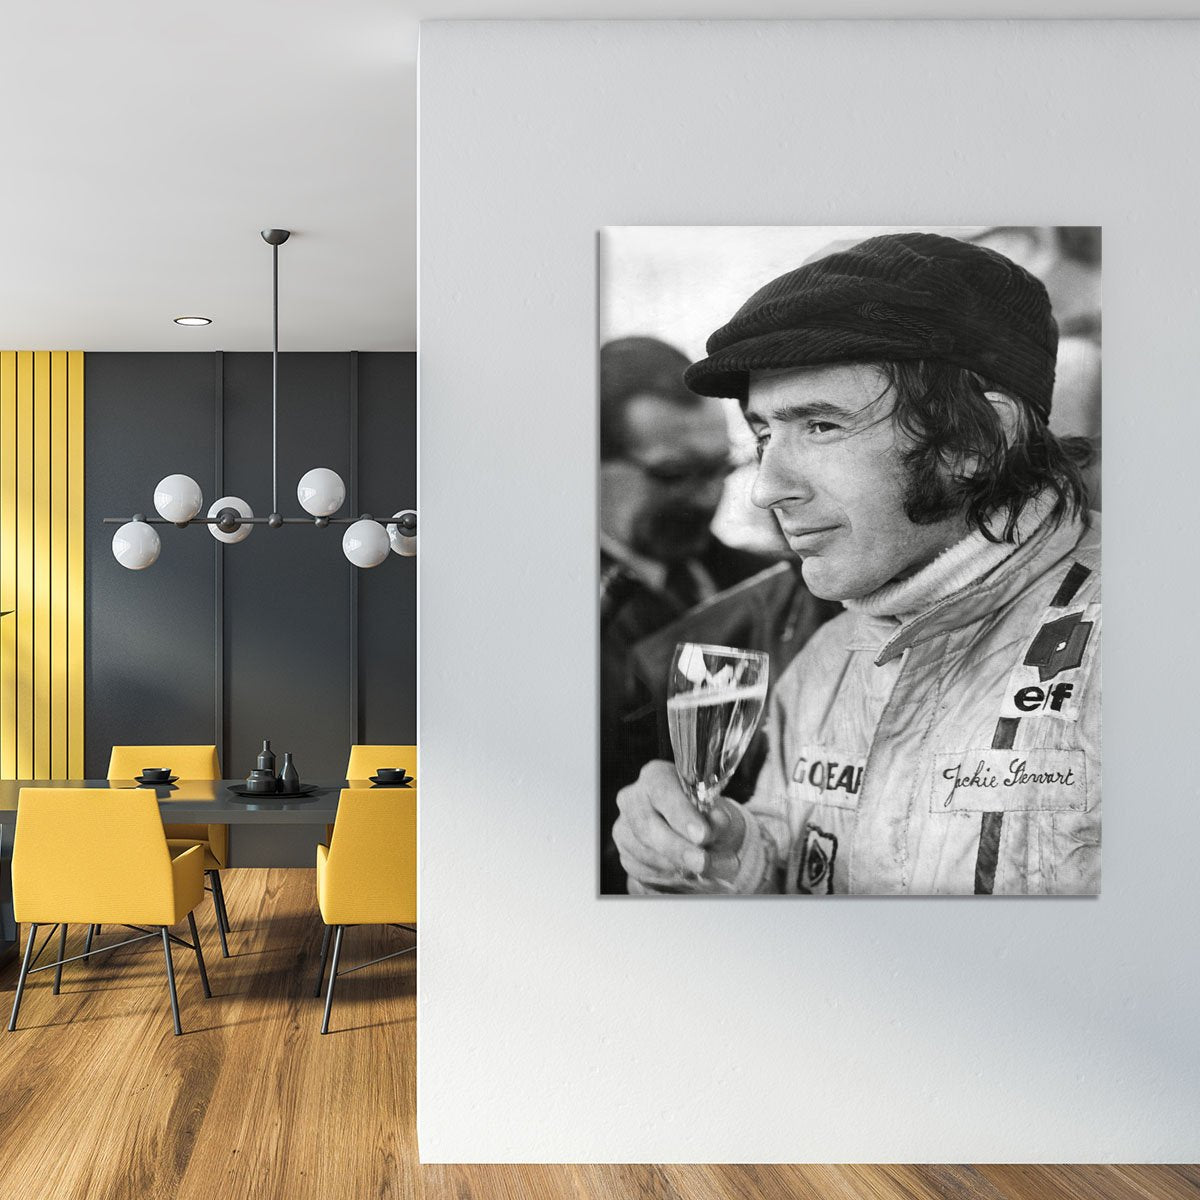 Racing driver Jackie Stewart in 1971 Canvas Print or Poster